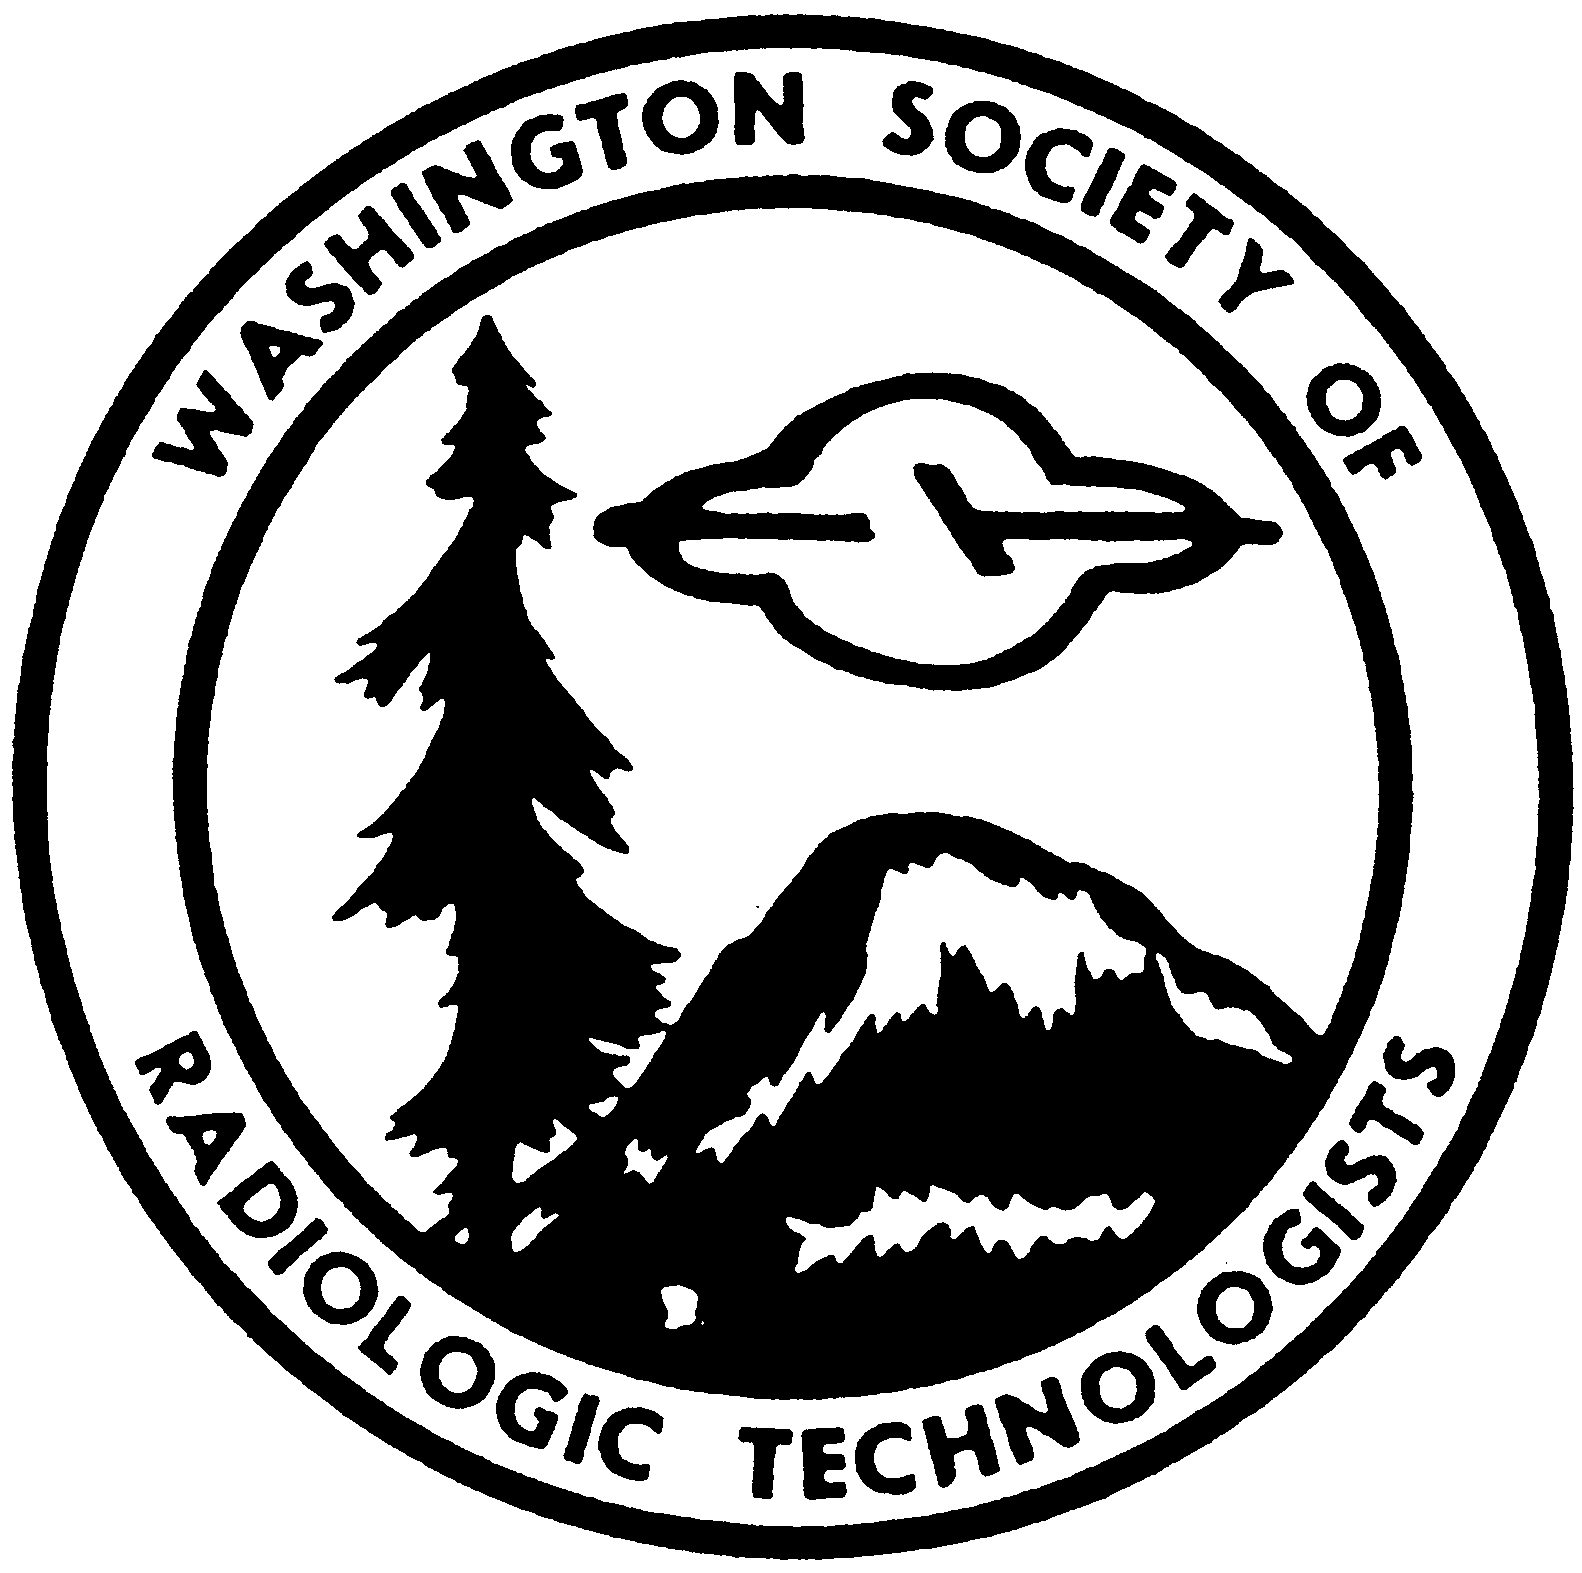 The Official Account of the Washington Society of Radiologic Technologists.